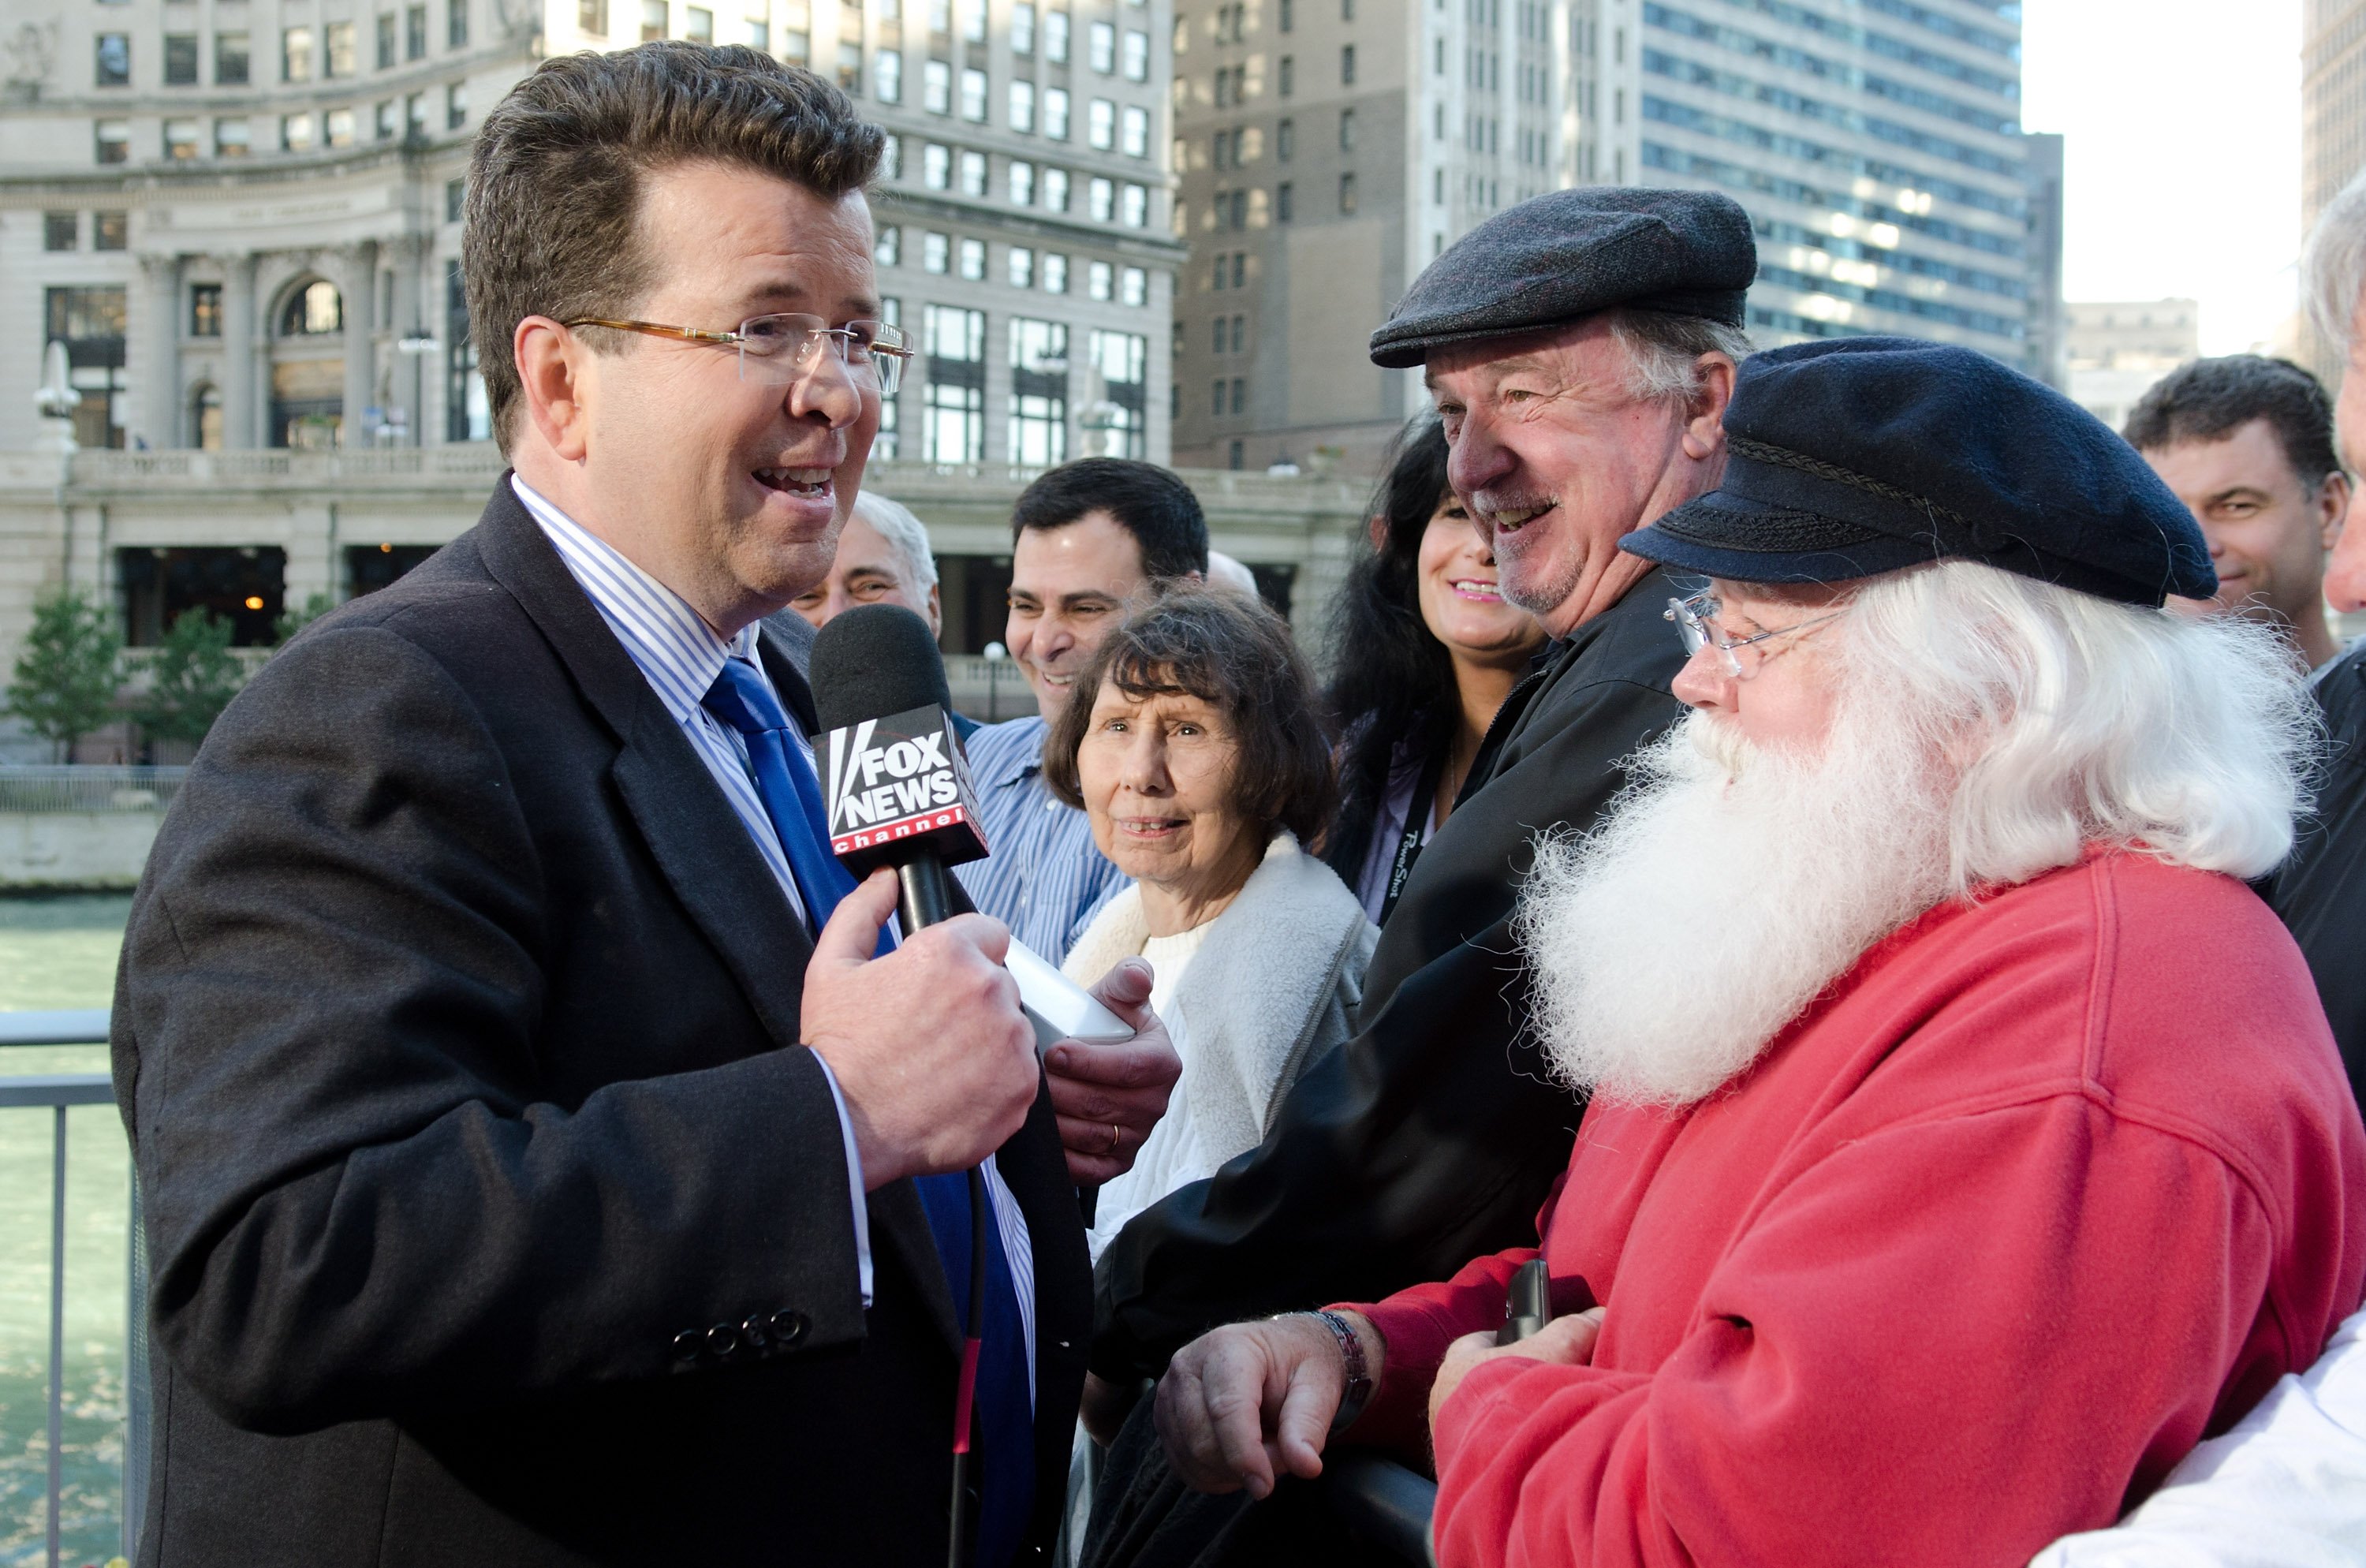 Neil Cavuto speaks with the audience during FOX's "Your World with Cavuto" live from the River Walk at Trump International Hotel & Tower on October 3, 2011 in Chicago, Illinois. | Photo: Getty Images